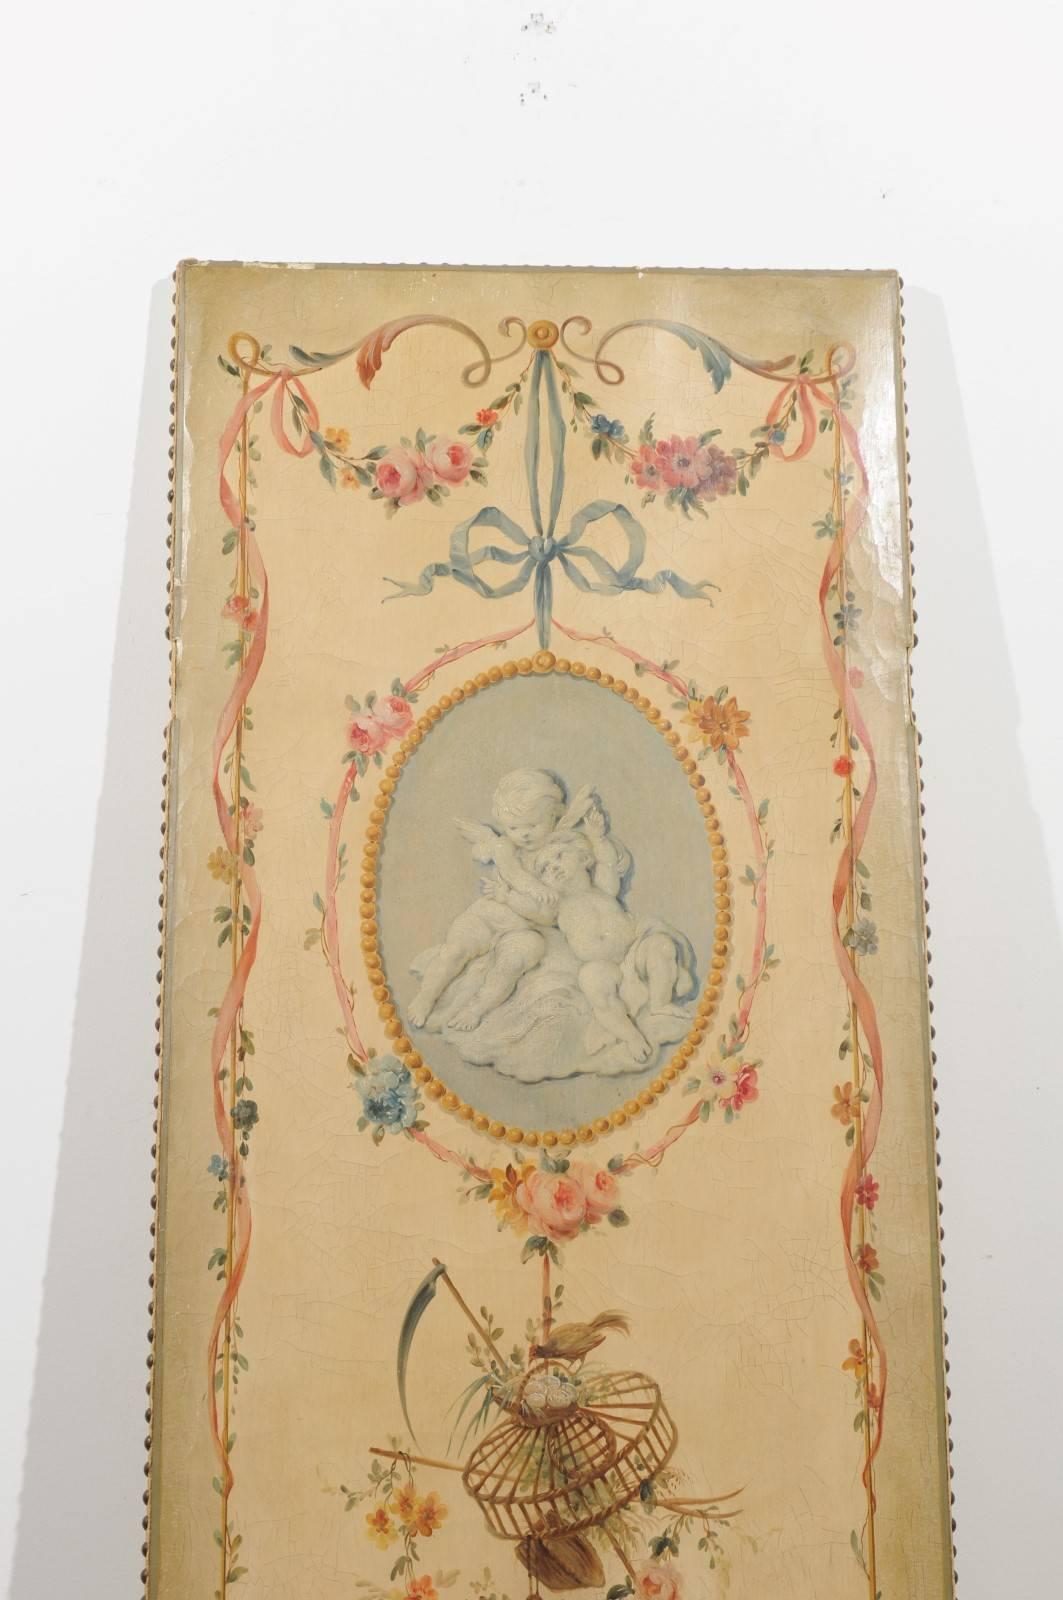 19th Century Italian Single Decorative Panel with Cherubs and Floral Motifs 2